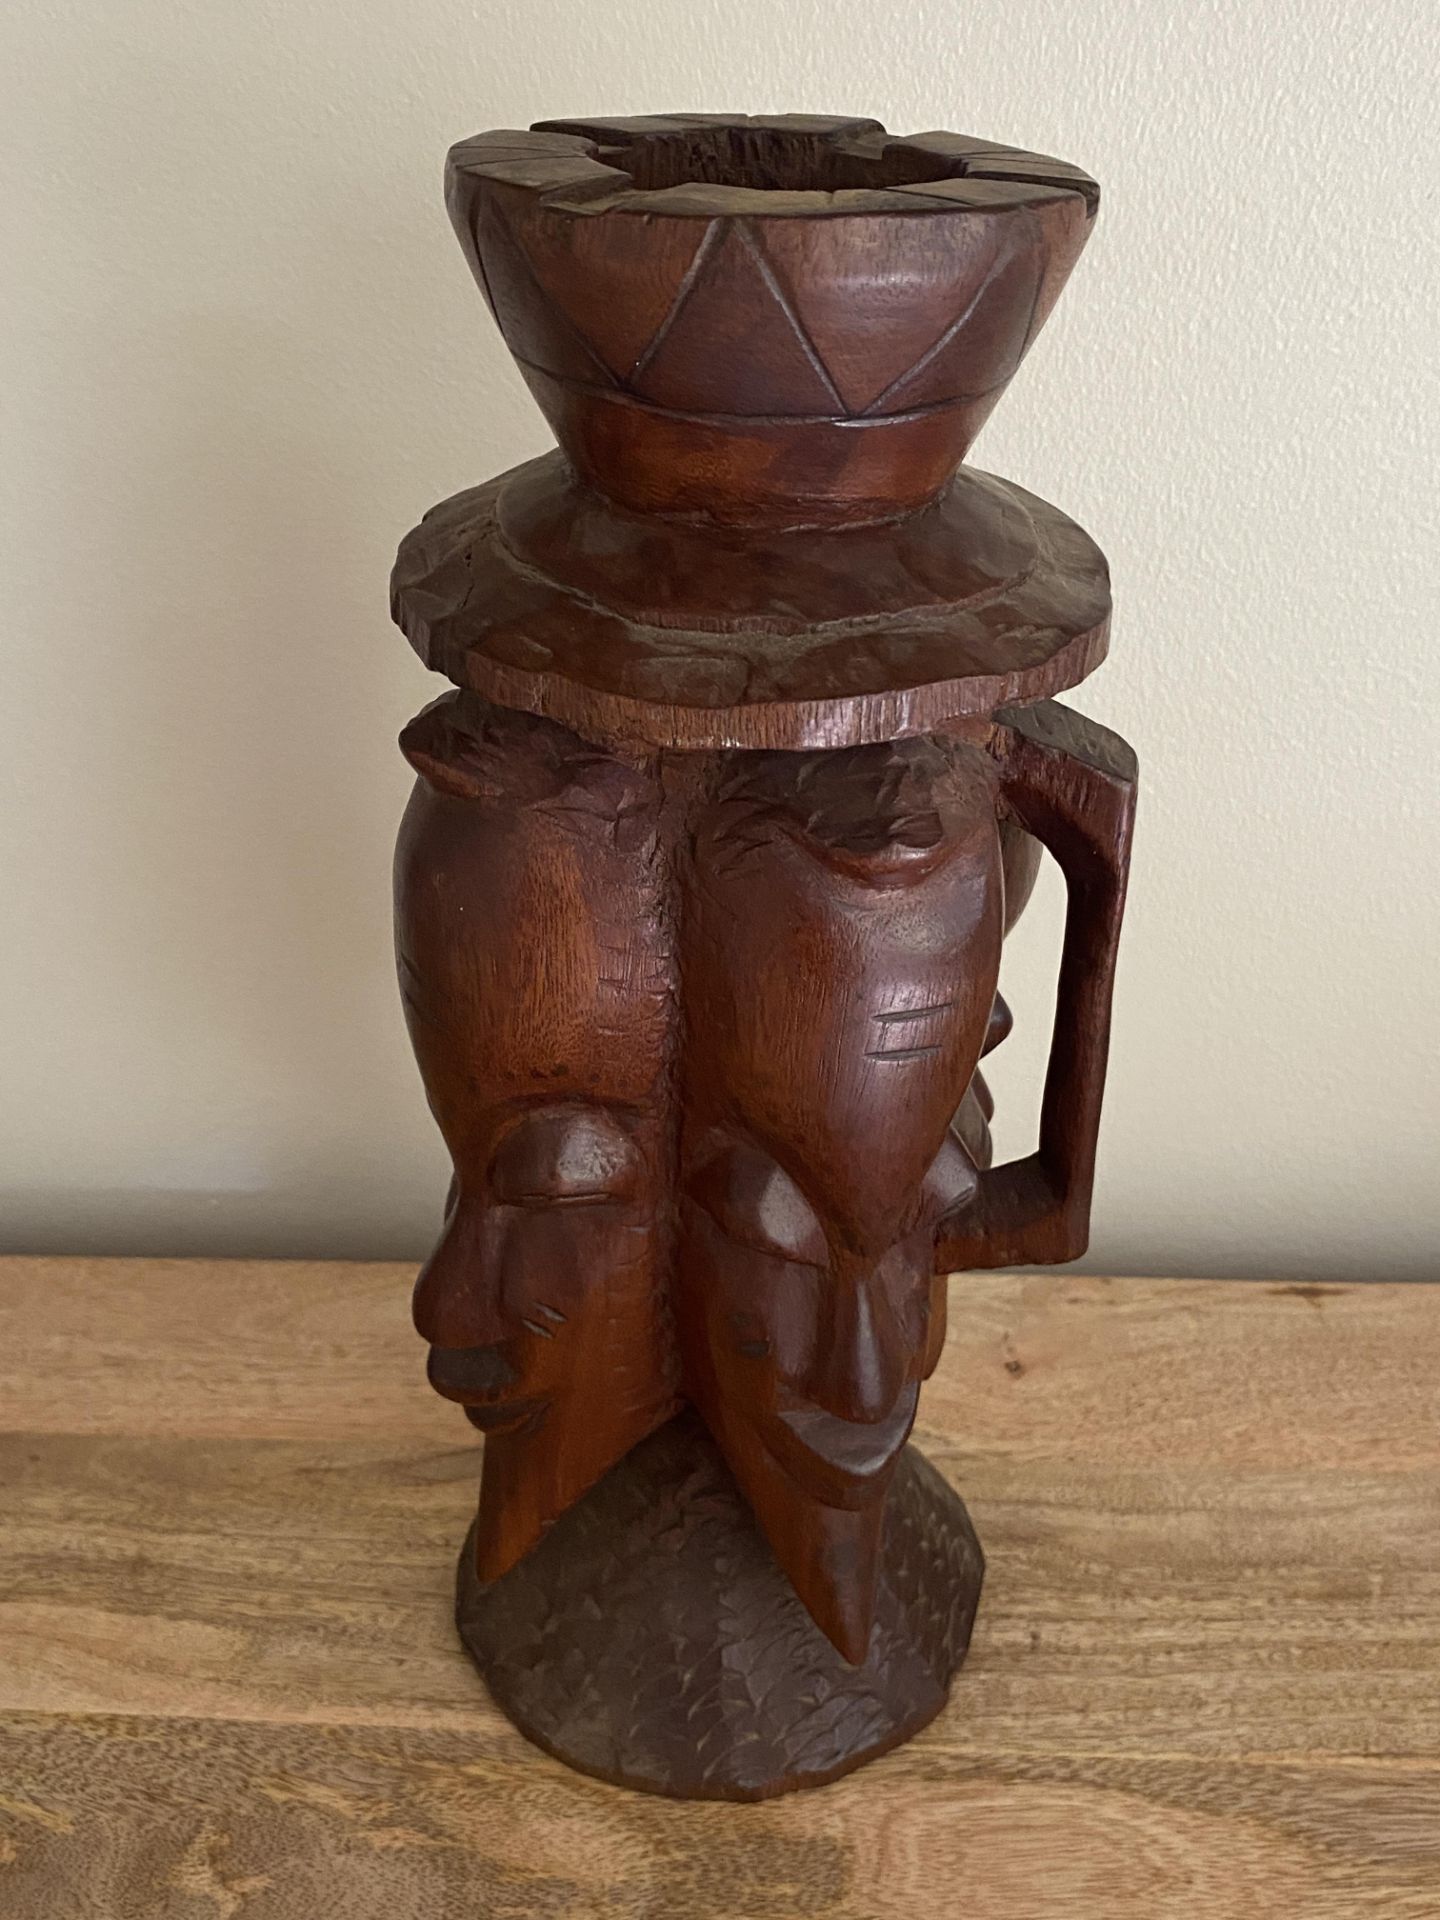 A VINTAGE MID 20TH CENTURY AFRICAN TRIBAL CARVED WOODEN FACE MASK JUG WITH HANDLE AND ASHTRAY DESIGN - Bild 3 aus 6